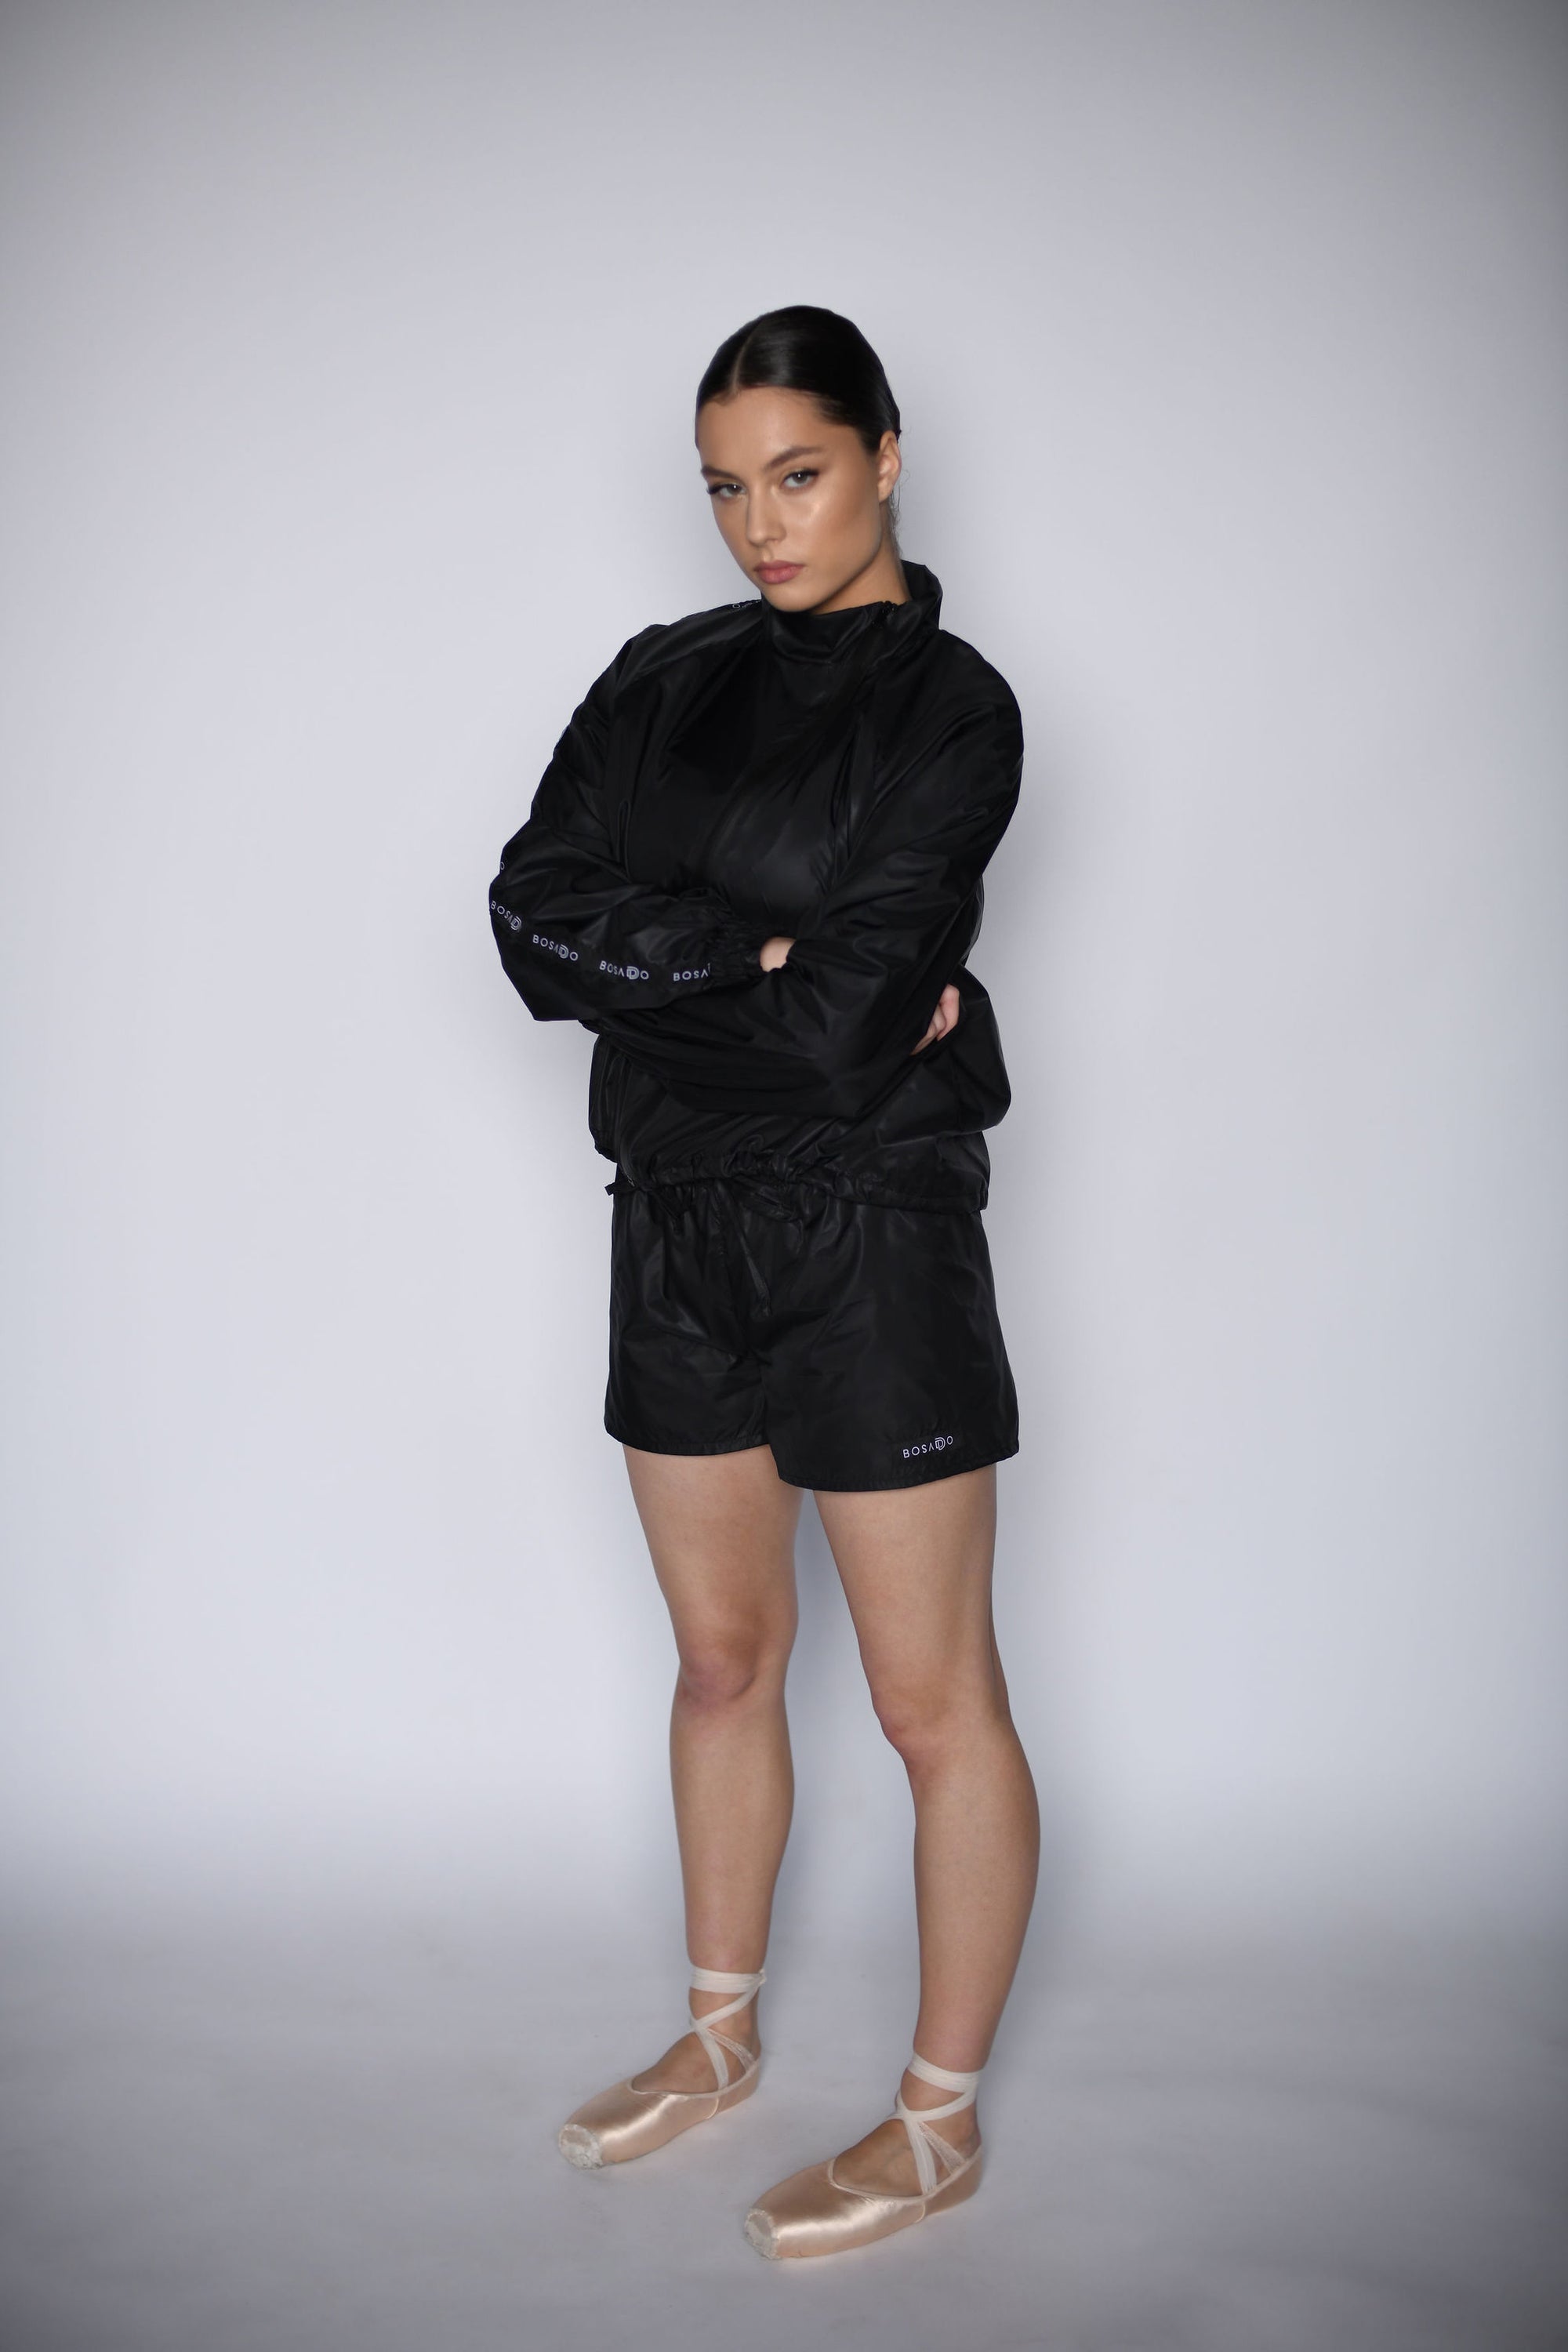 NEW URBAN SWAN COLLECTION S/S 23 | Black pearl sports suit with shorts